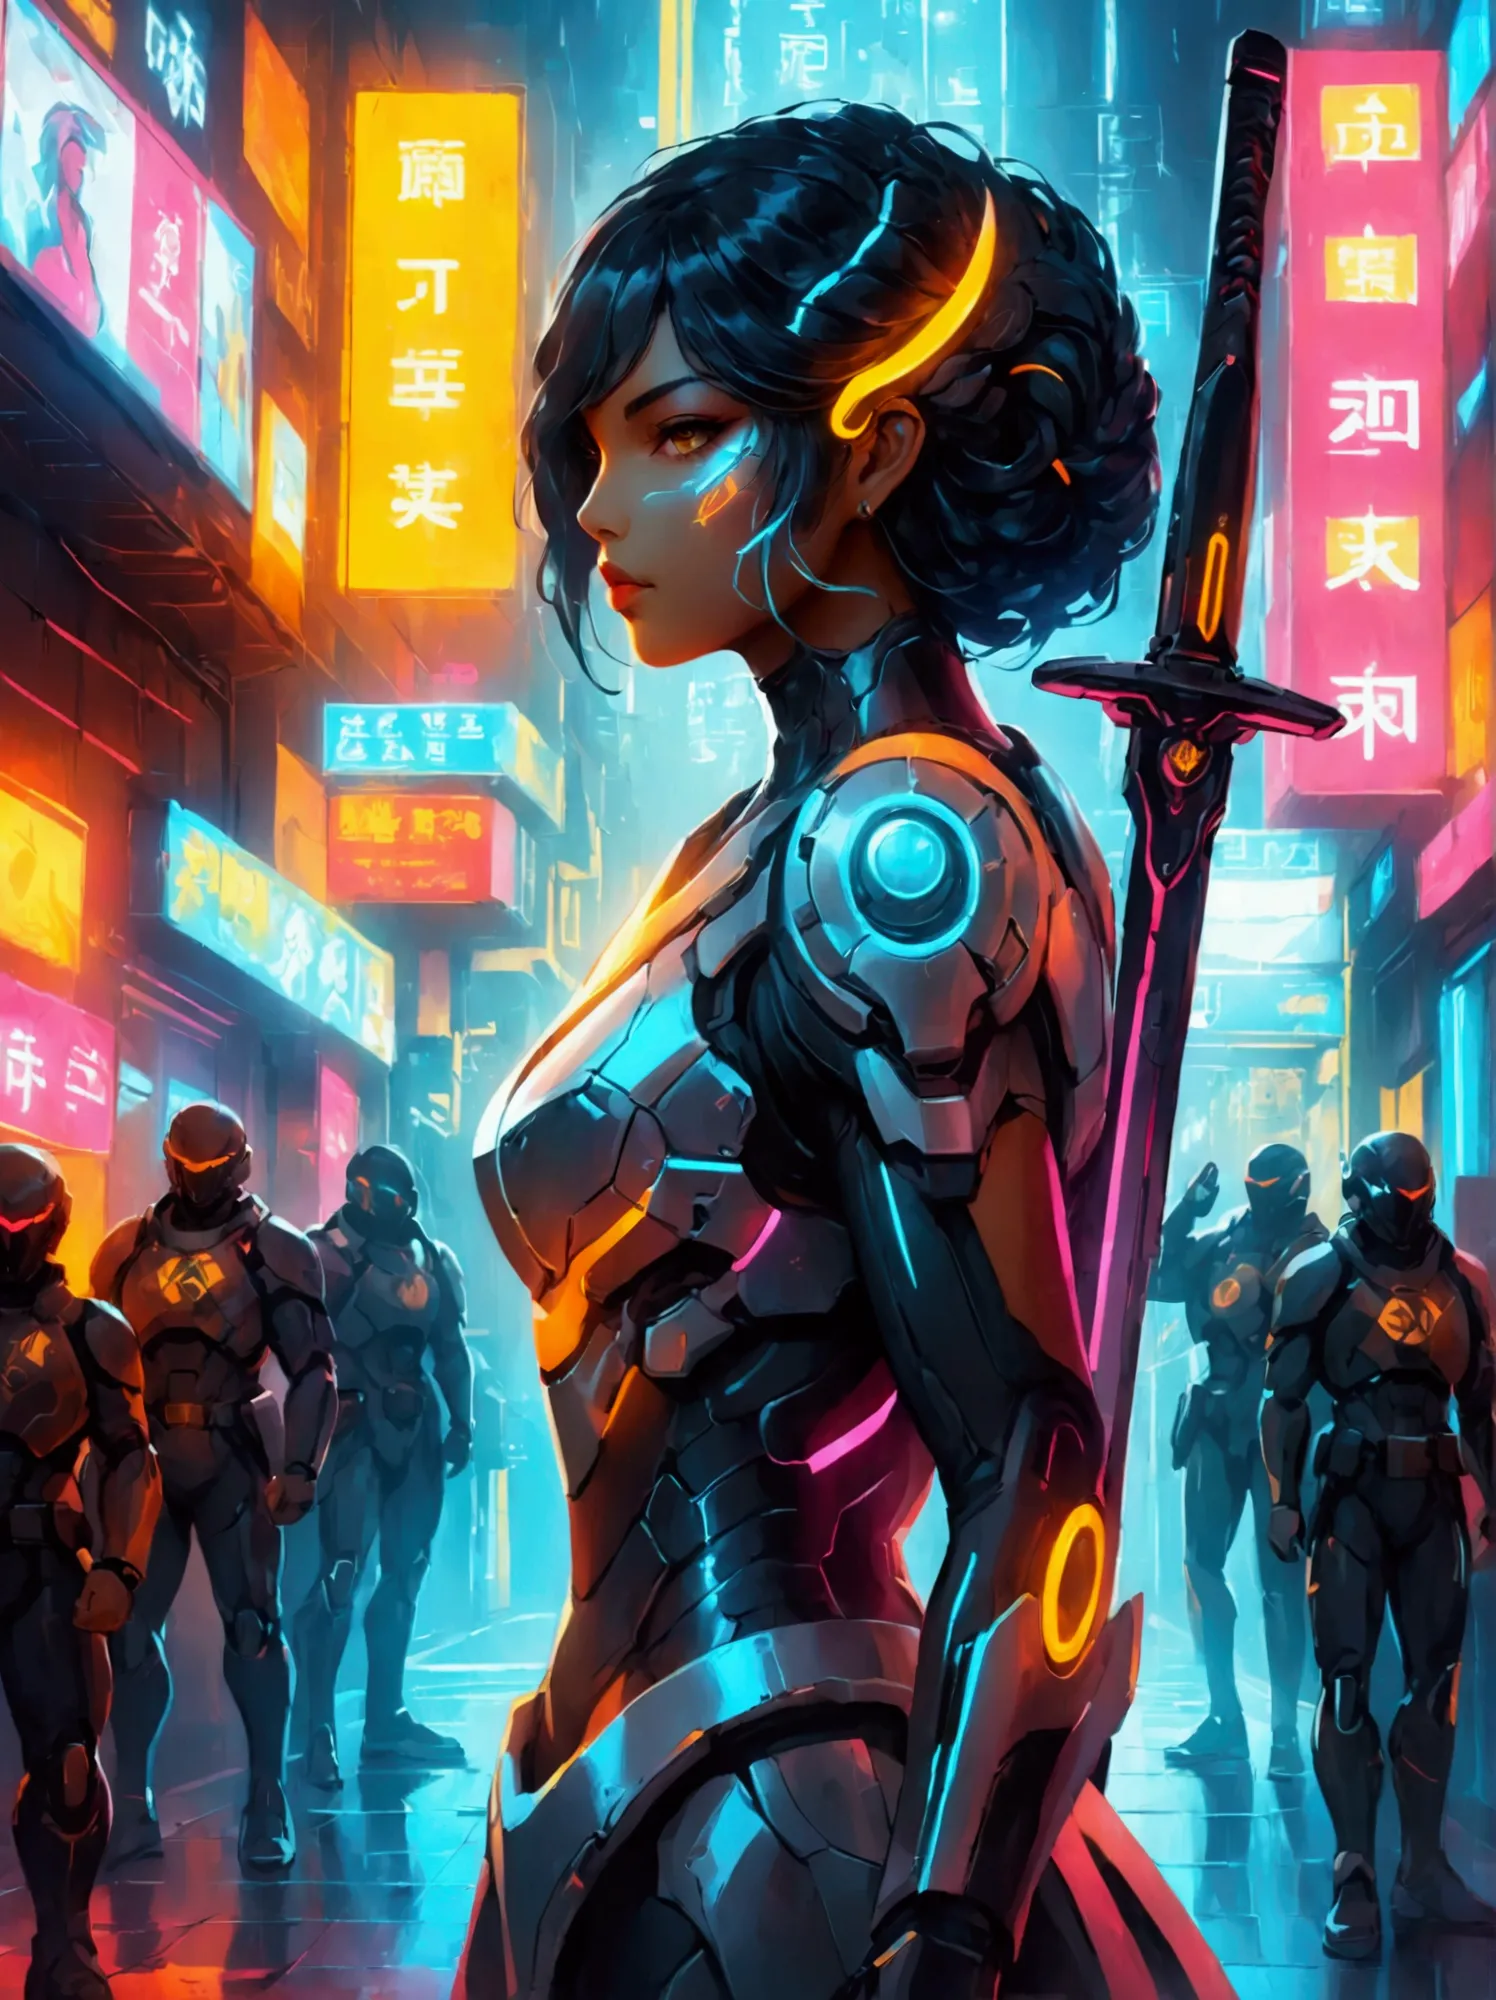 A futuristic warrior, resplendent in glowing armor of vibrant neon shades, stands poised in an active, dynamic stance. The warri...